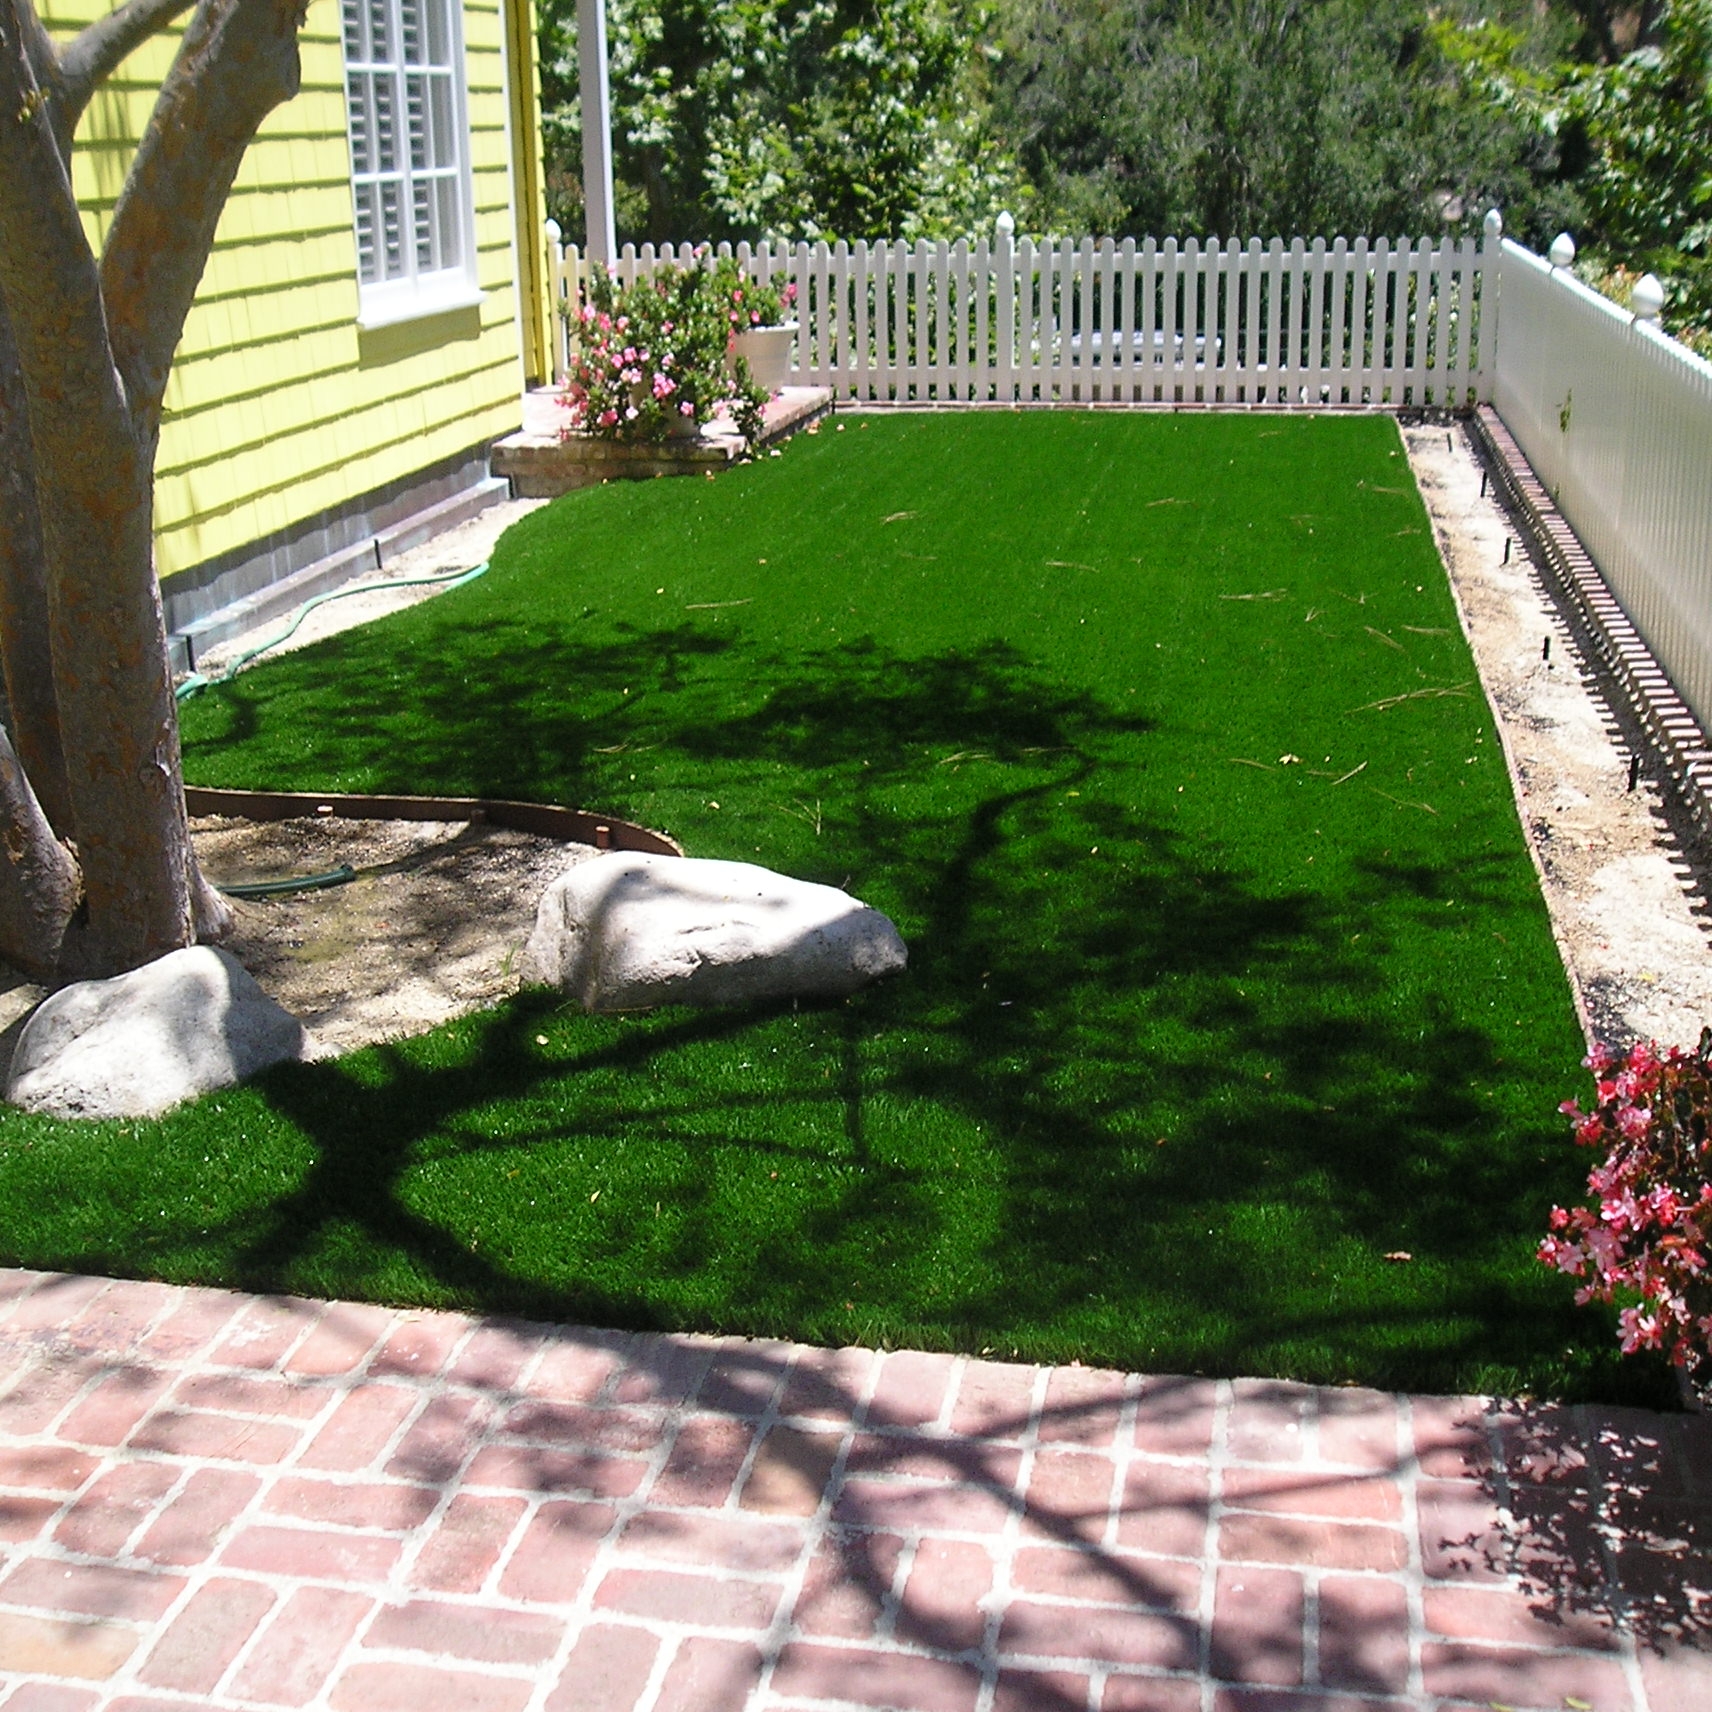 S Blade 50 residential landscaping,artificial turf residential,residential landscape,residential turf,residential artificial grass,fake grass for yard,backyard turf,turf backyard,turf yard,fake grass for backyard